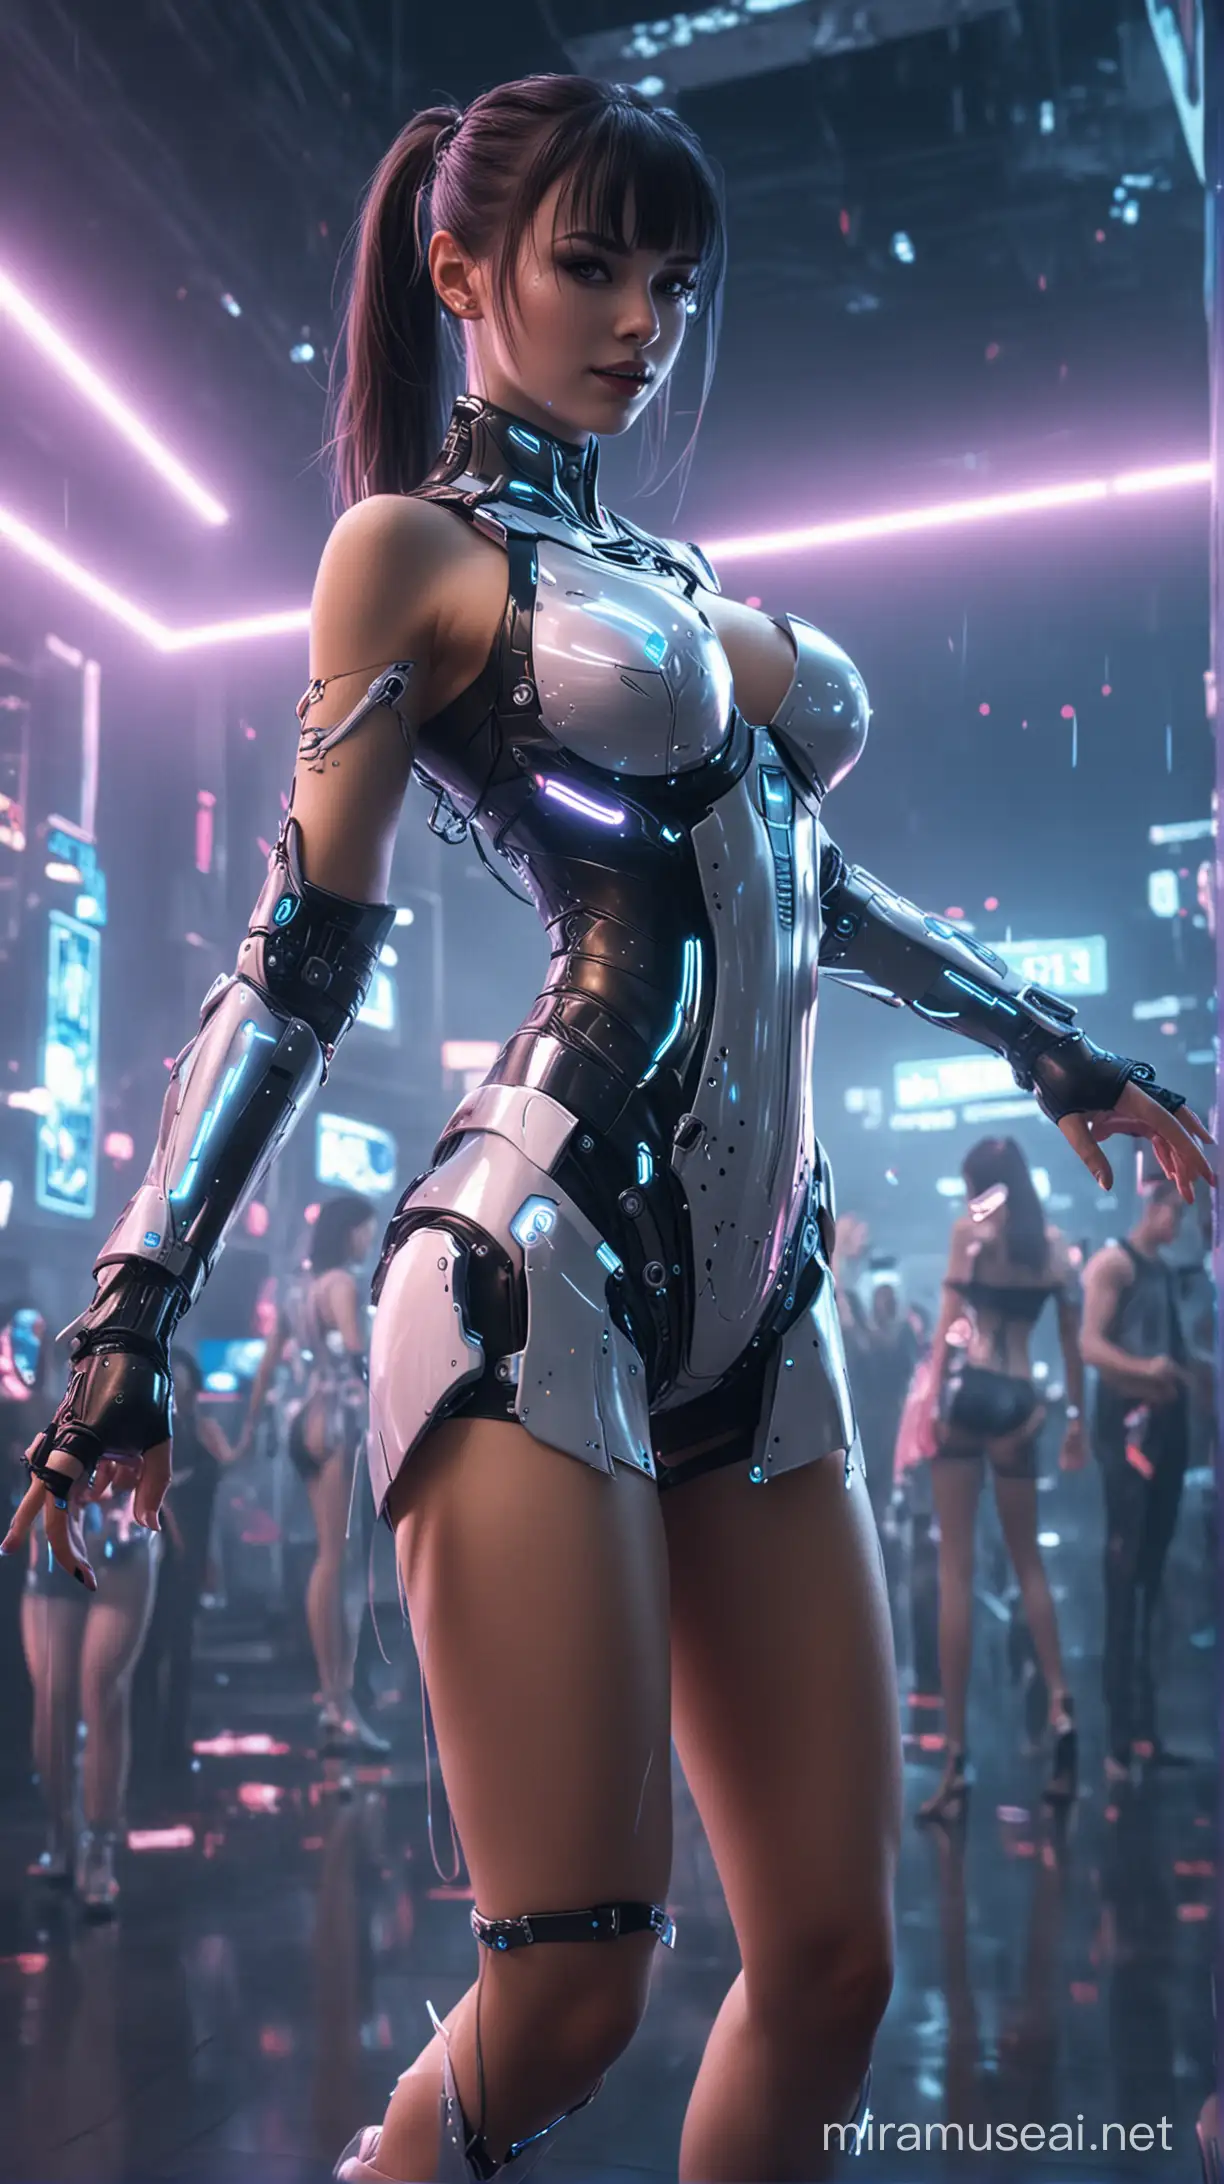 the future, cyber city night, beautiful cyber girl dancing at the night club